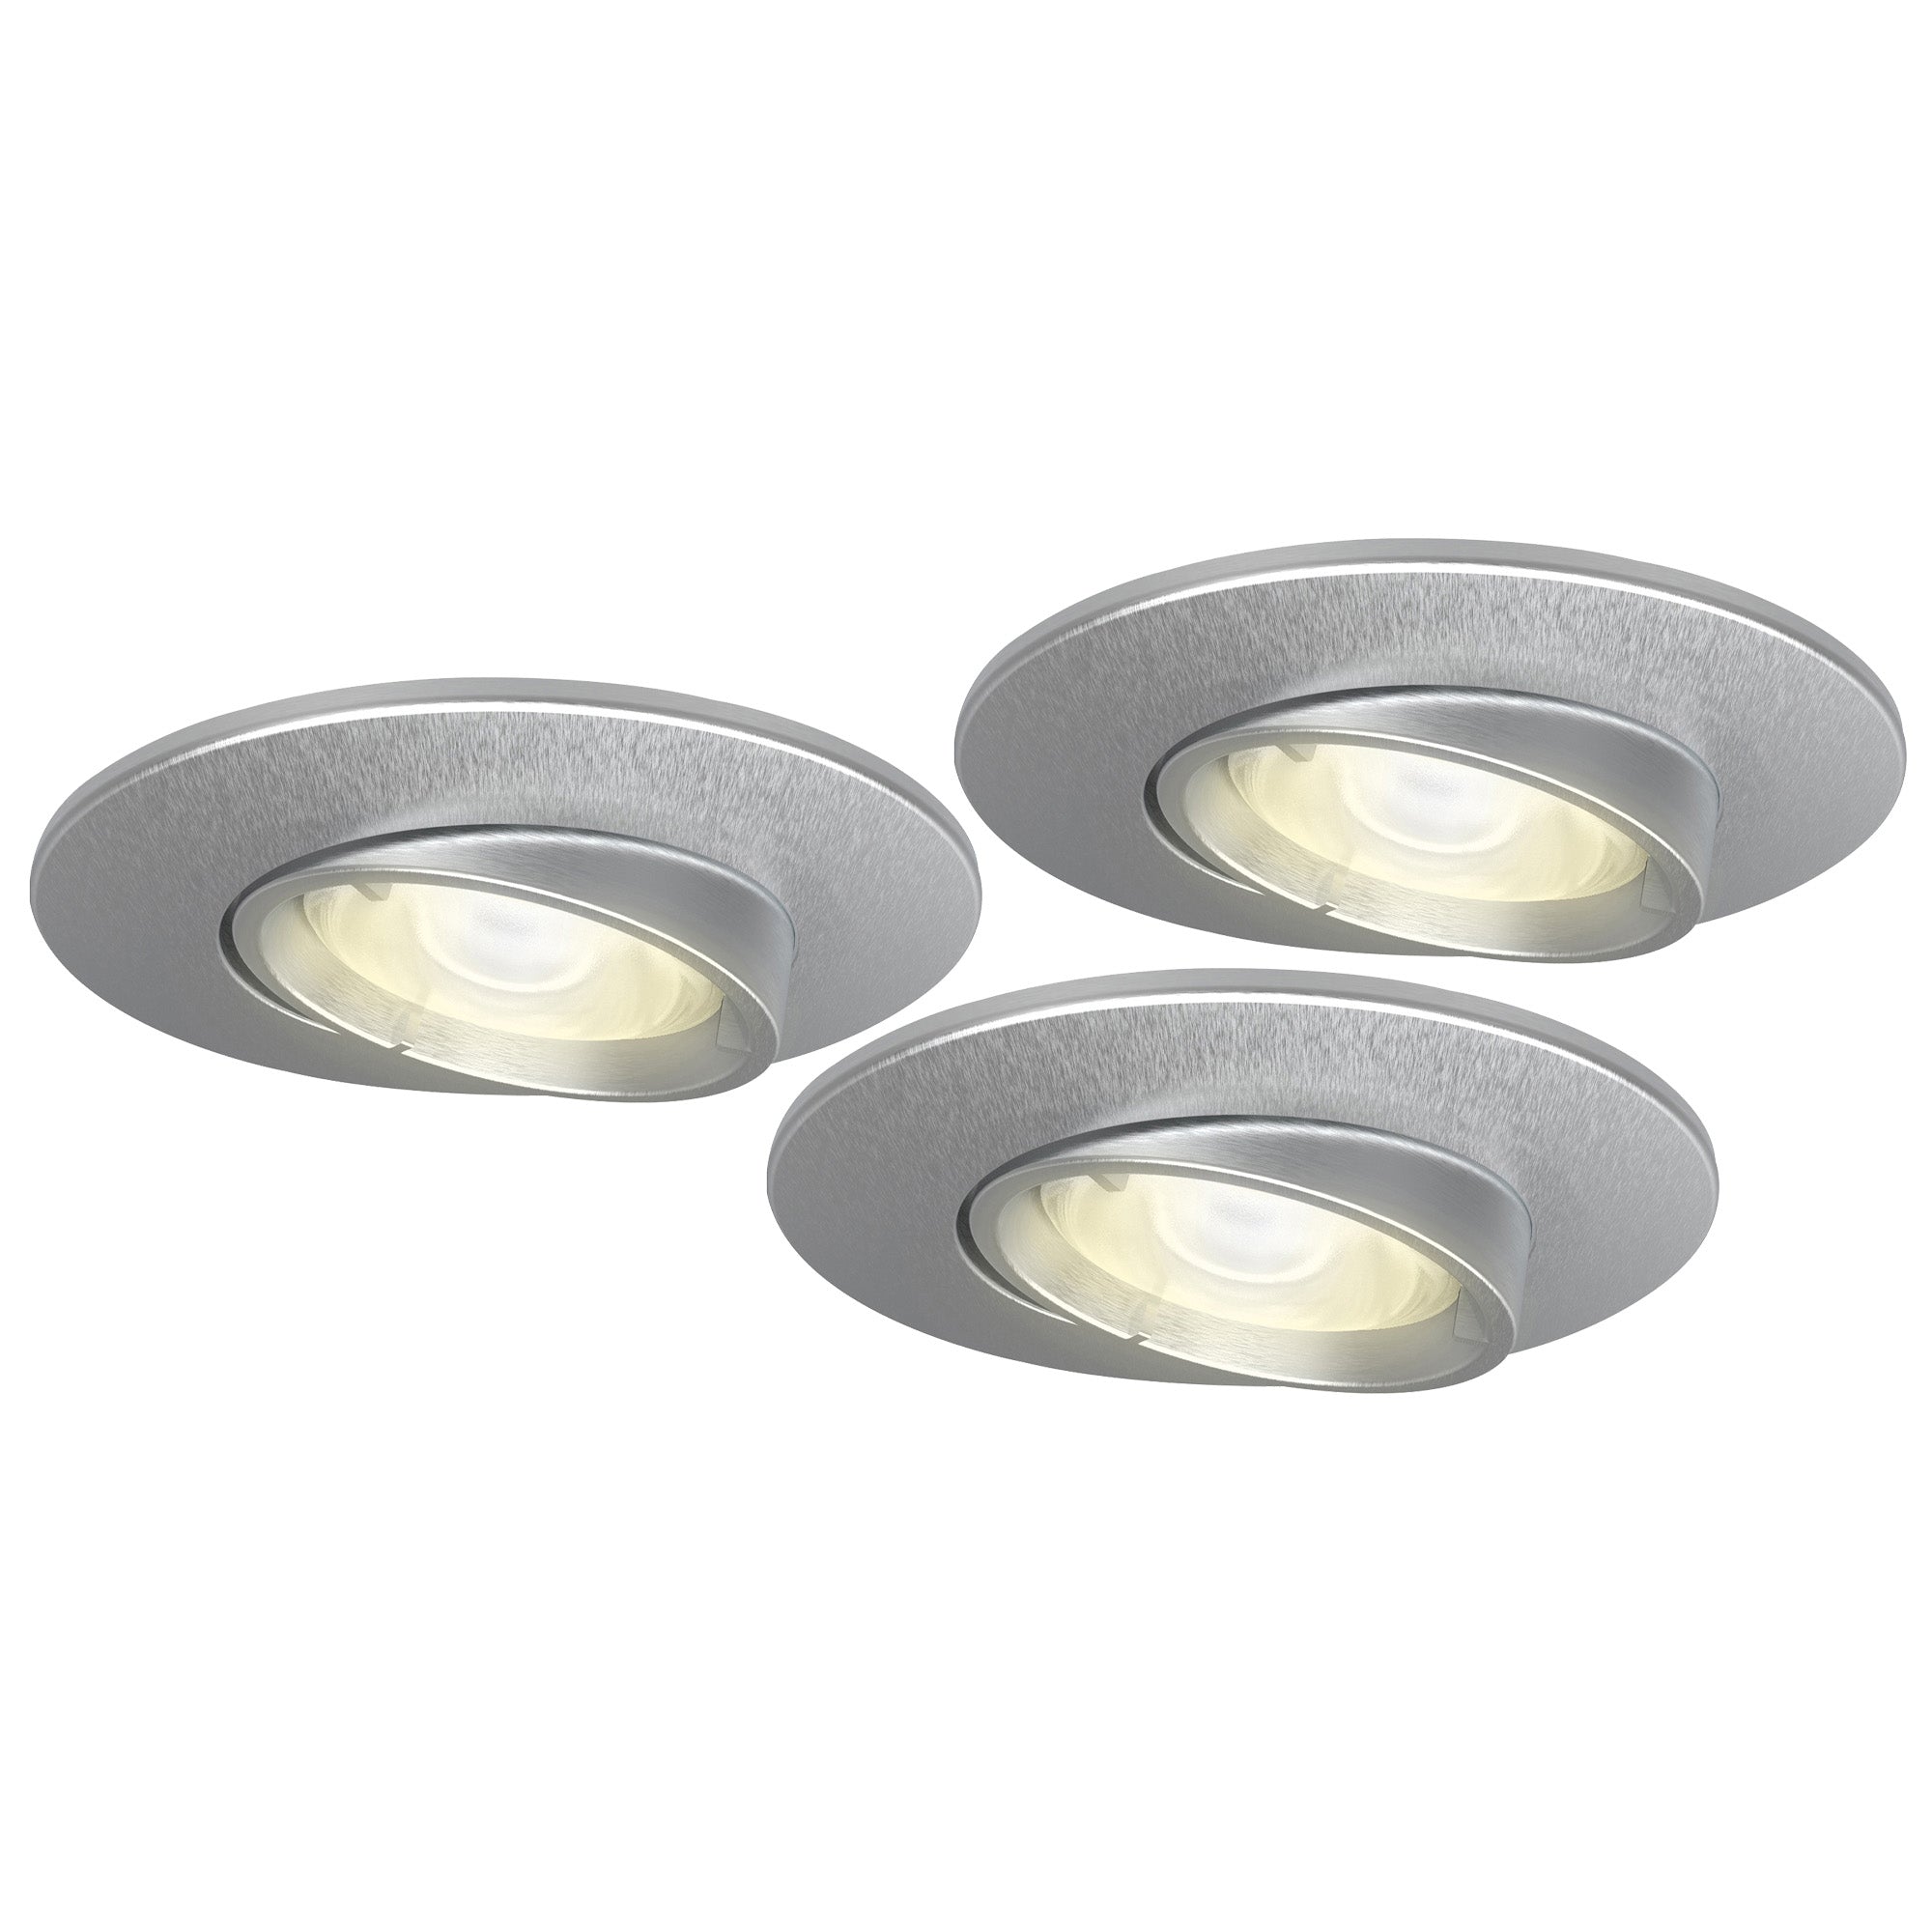 4lite WiZ Connected Fire-Rated IP20 GU10 Smart Adjustable LED Downlight - Satin Chrome (Pack of 3)